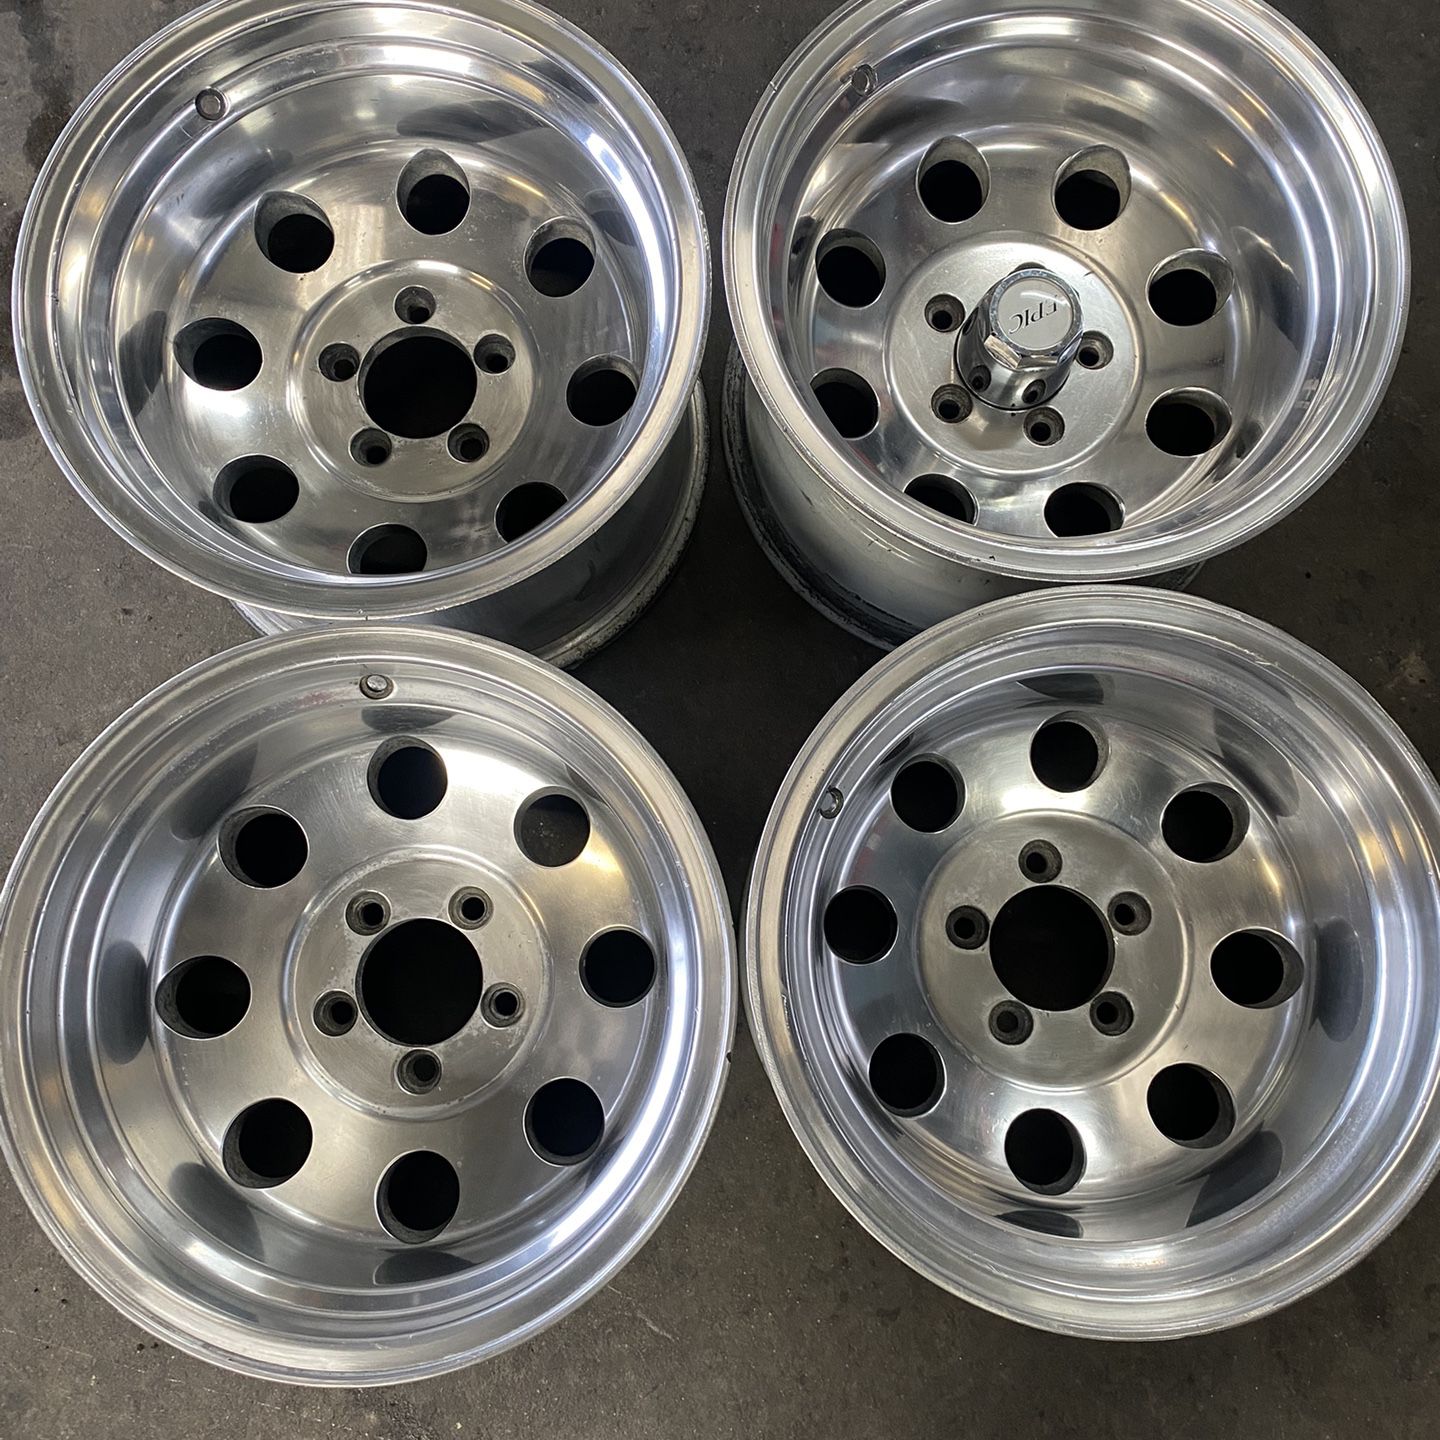 15x10 5x4.5 Vintage Wheels Polished Jeep Ford for Sale in Stockton 